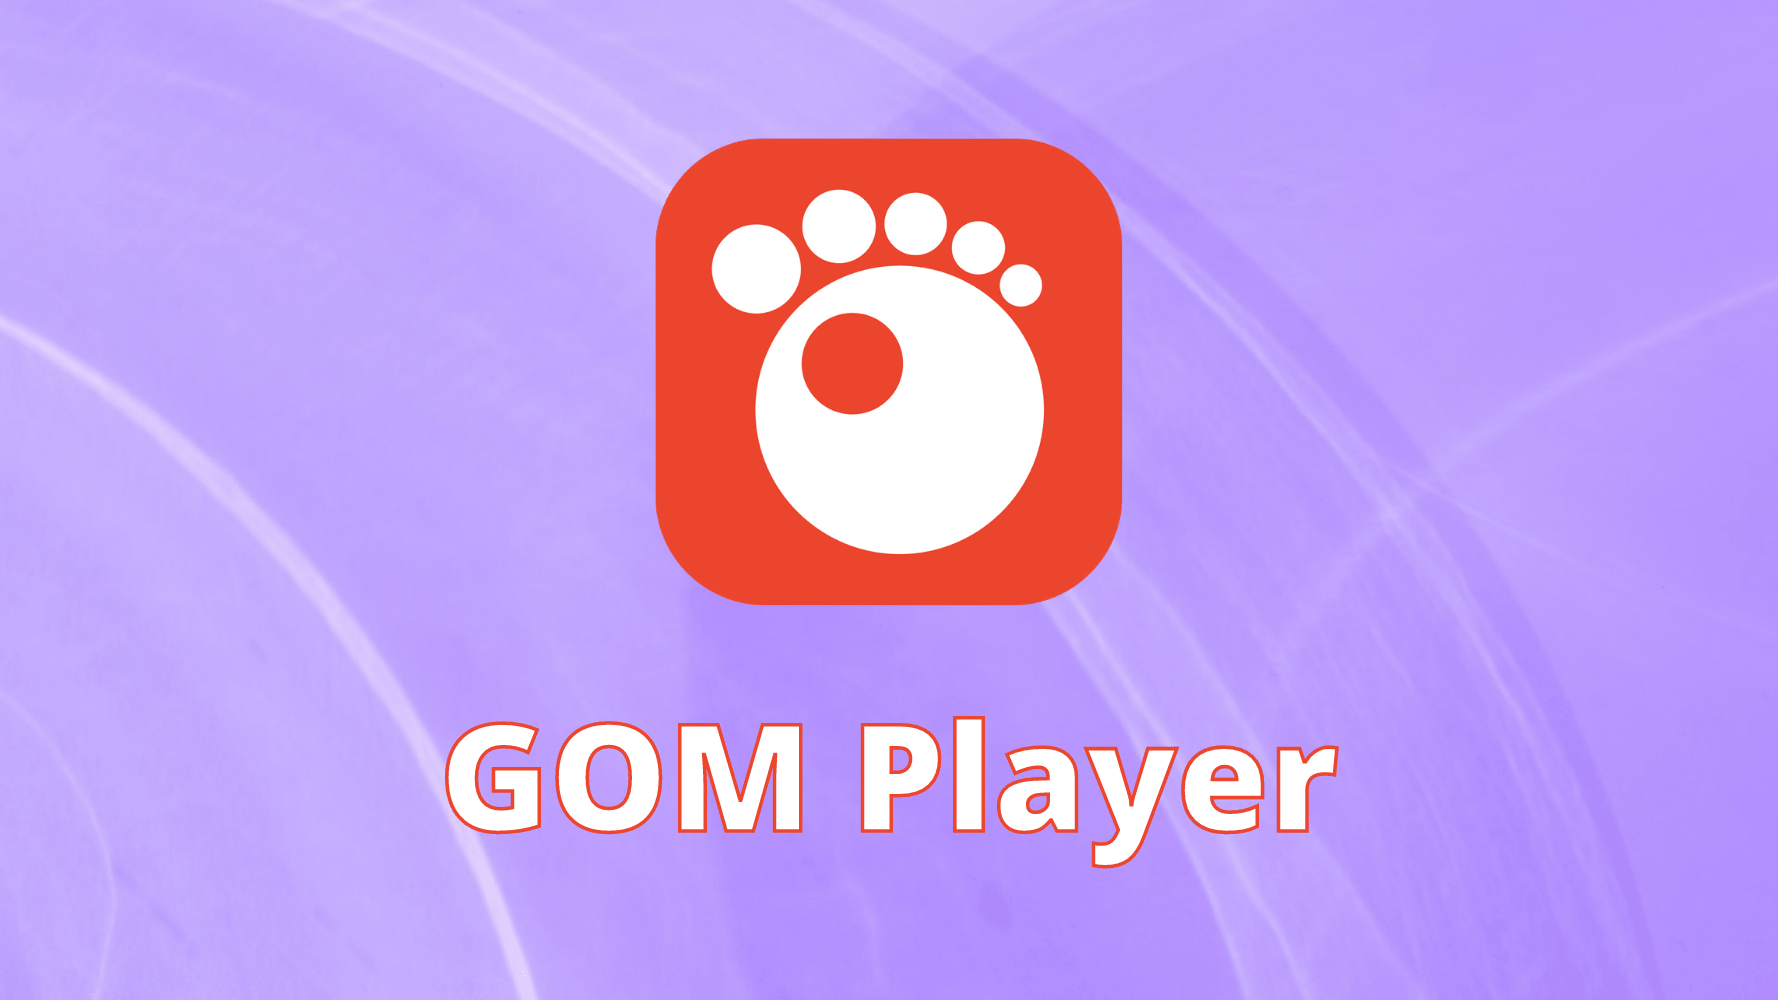 download the last version for ios GOM Player Plus 2.3.92.5362